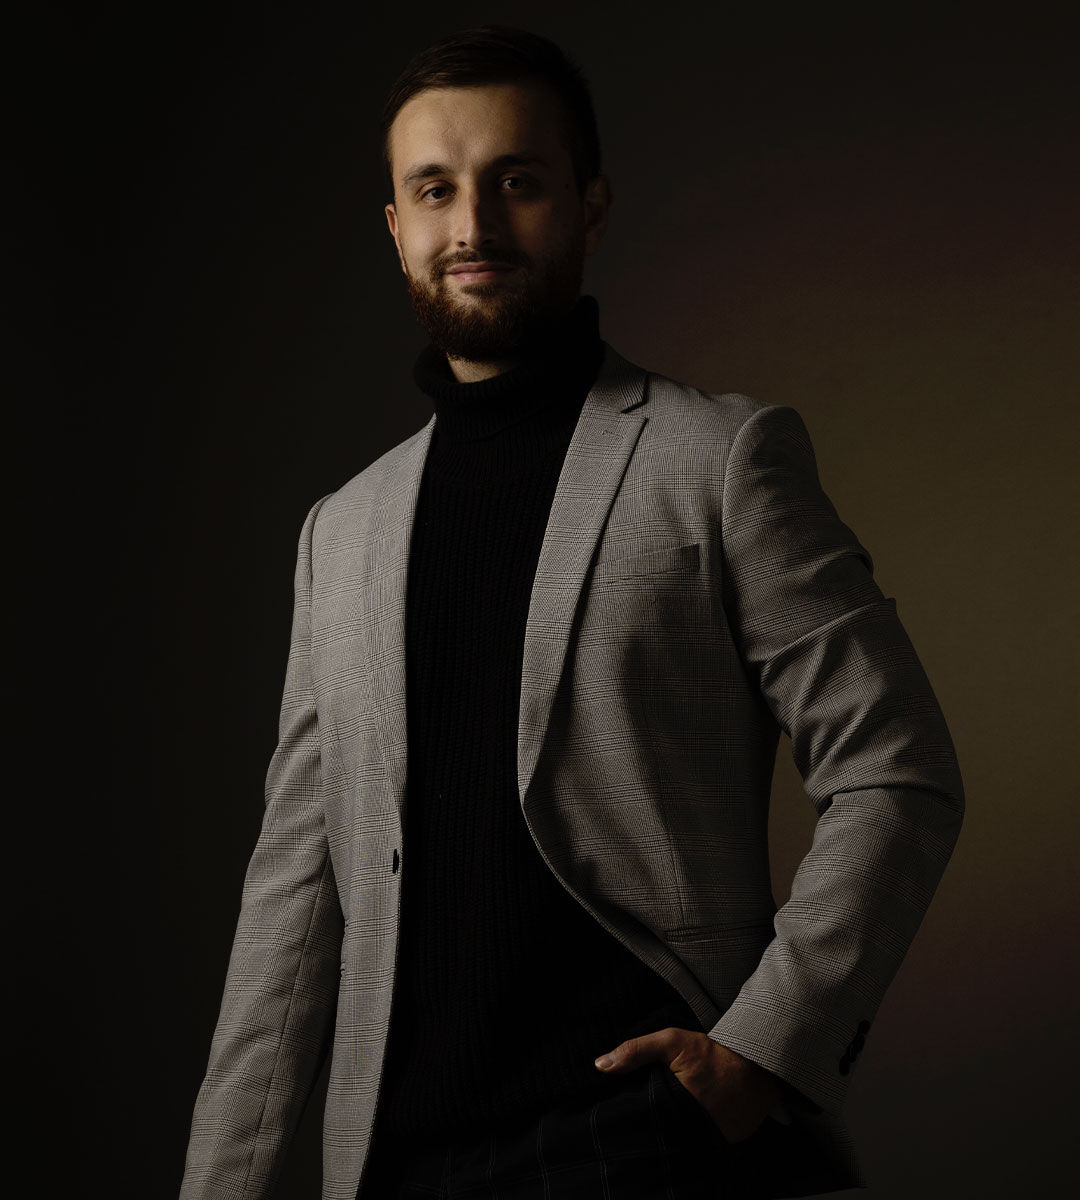 A poised young man stands with one hand in his pocket, wearing a sophisticated grey blazer over a black turtleneck, against a dark background.